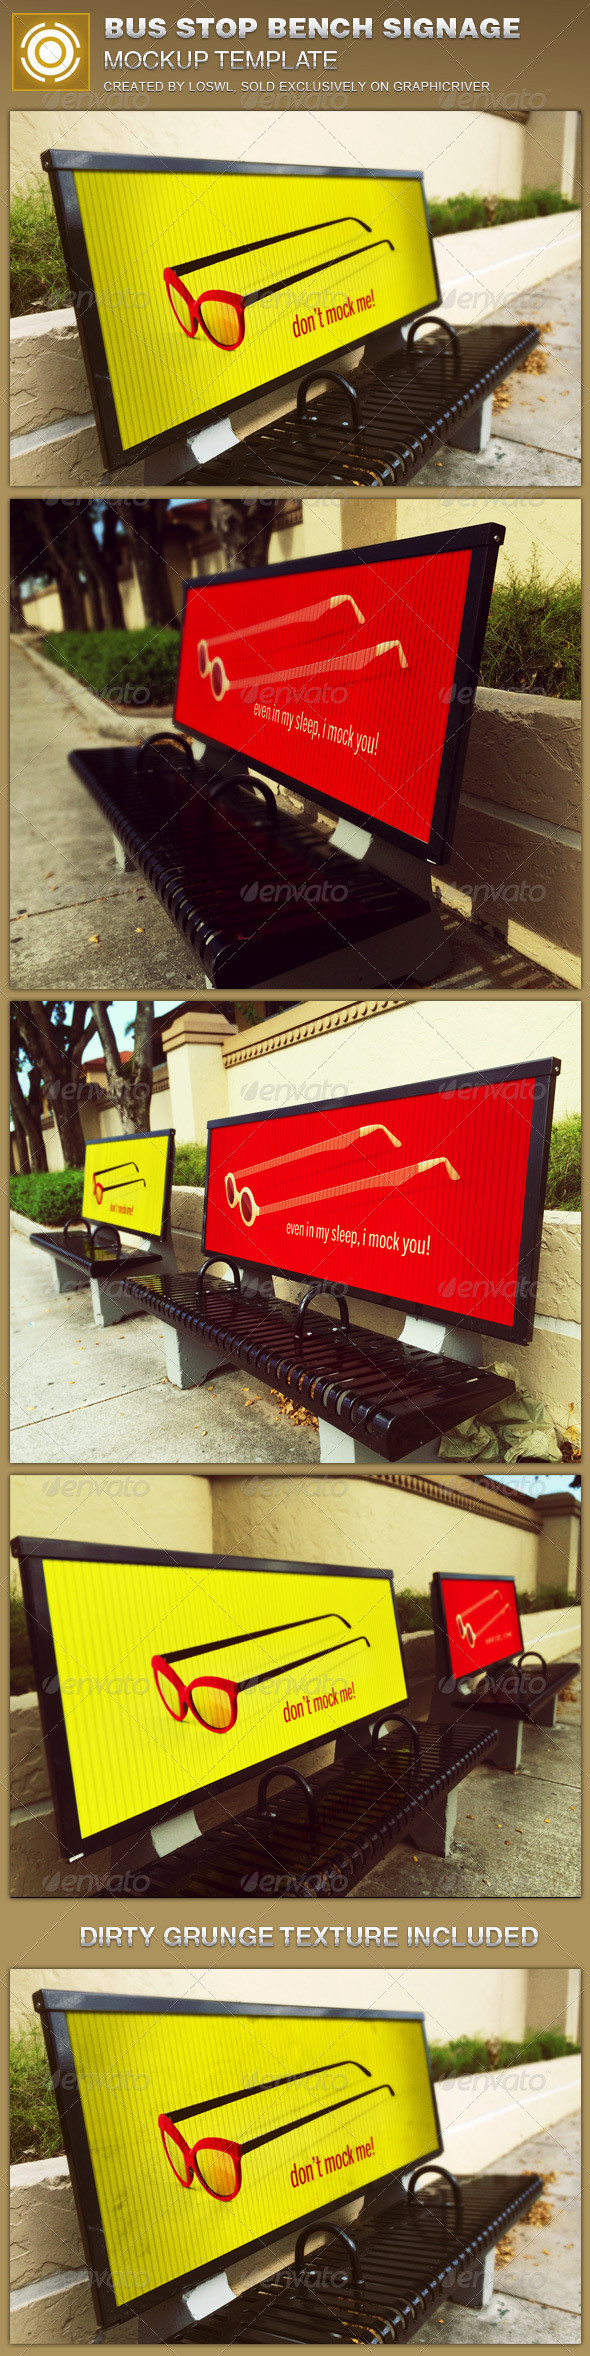 Corrugated bus stop bench signage mockup image preview